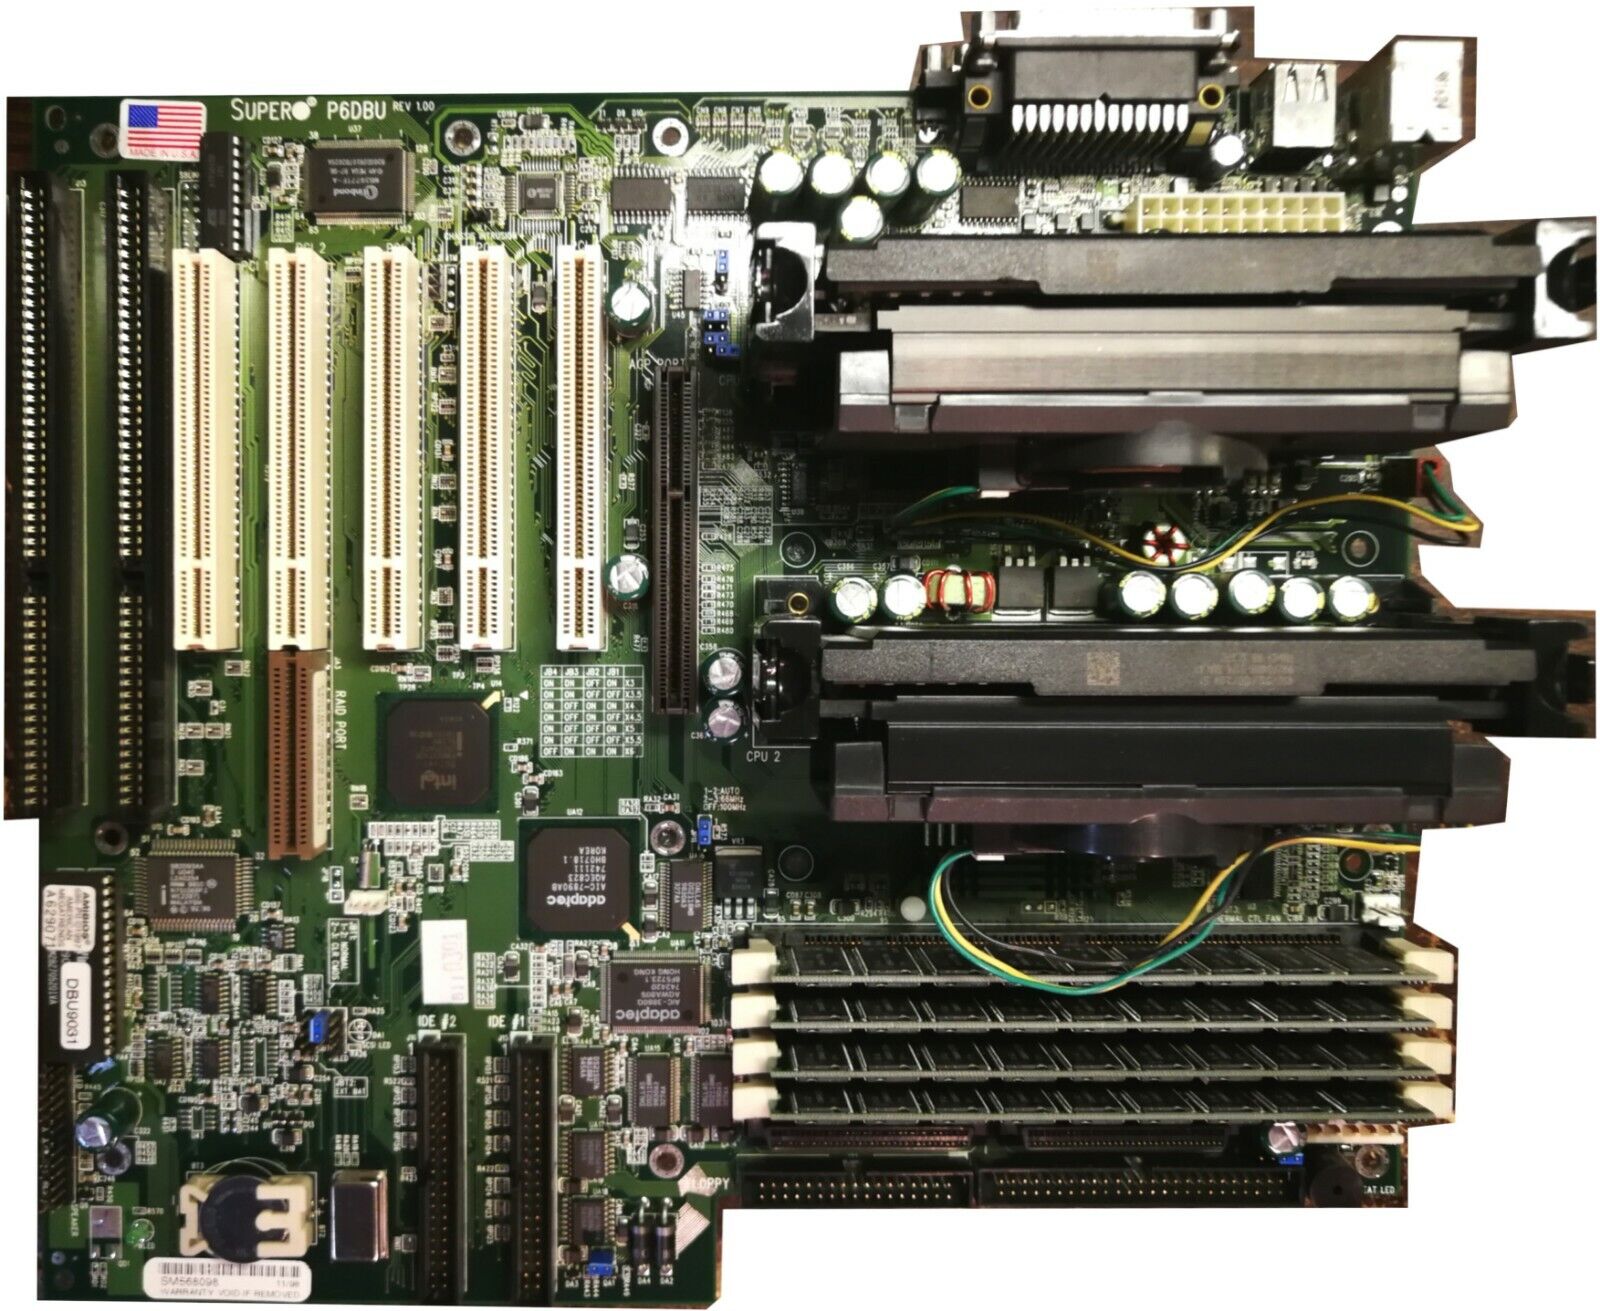 Super Micro Computer P6DBU Motherboard with Complete Set of Other Parts